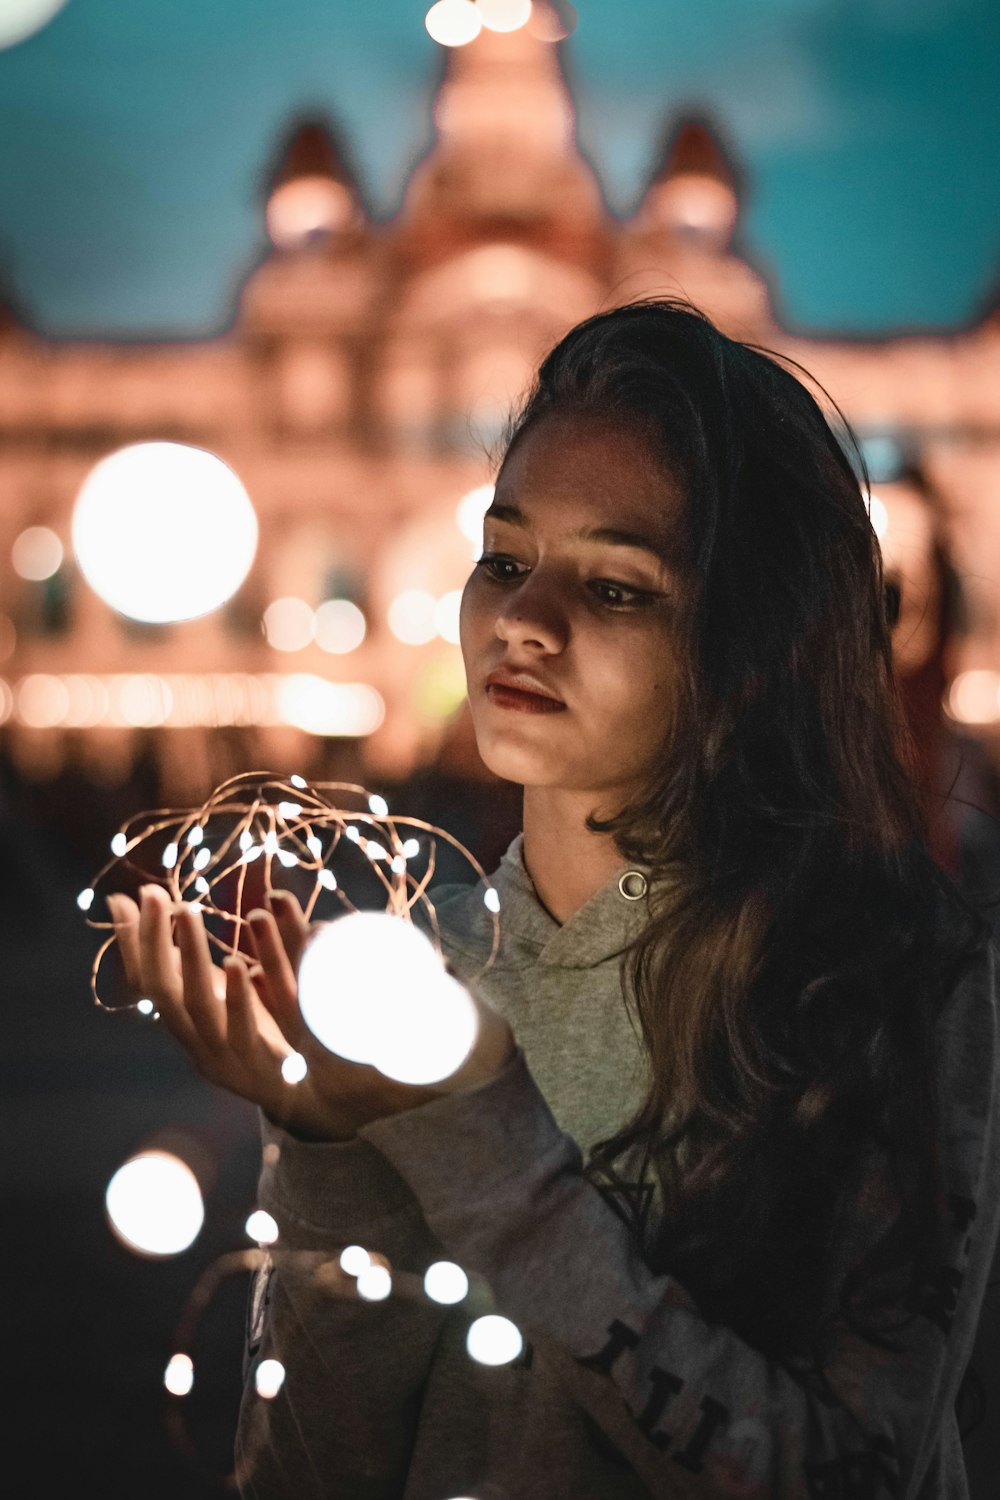 a woman holding a ball of lights in front of a building